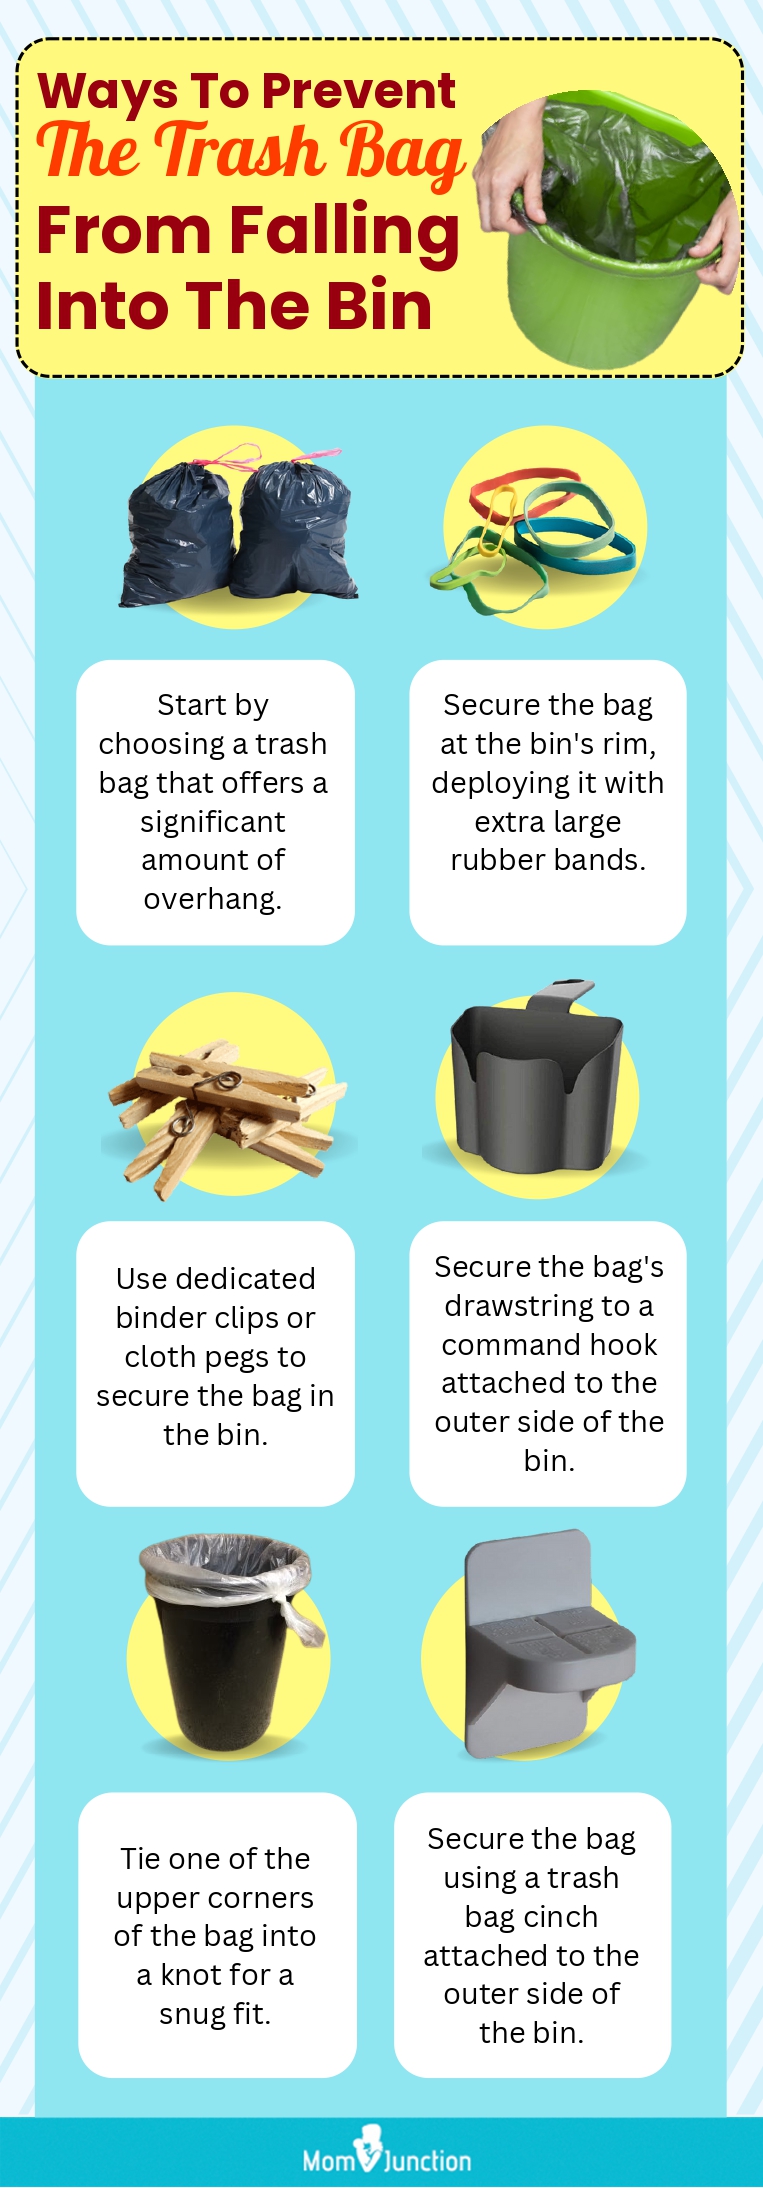 https://cdn2.momjunction.com/wp-content/uploads/2020/09/Ways-To-Prevent-The-Trash-Bag-From-Falling-Into-The-Bin-1_page-0001.jpg